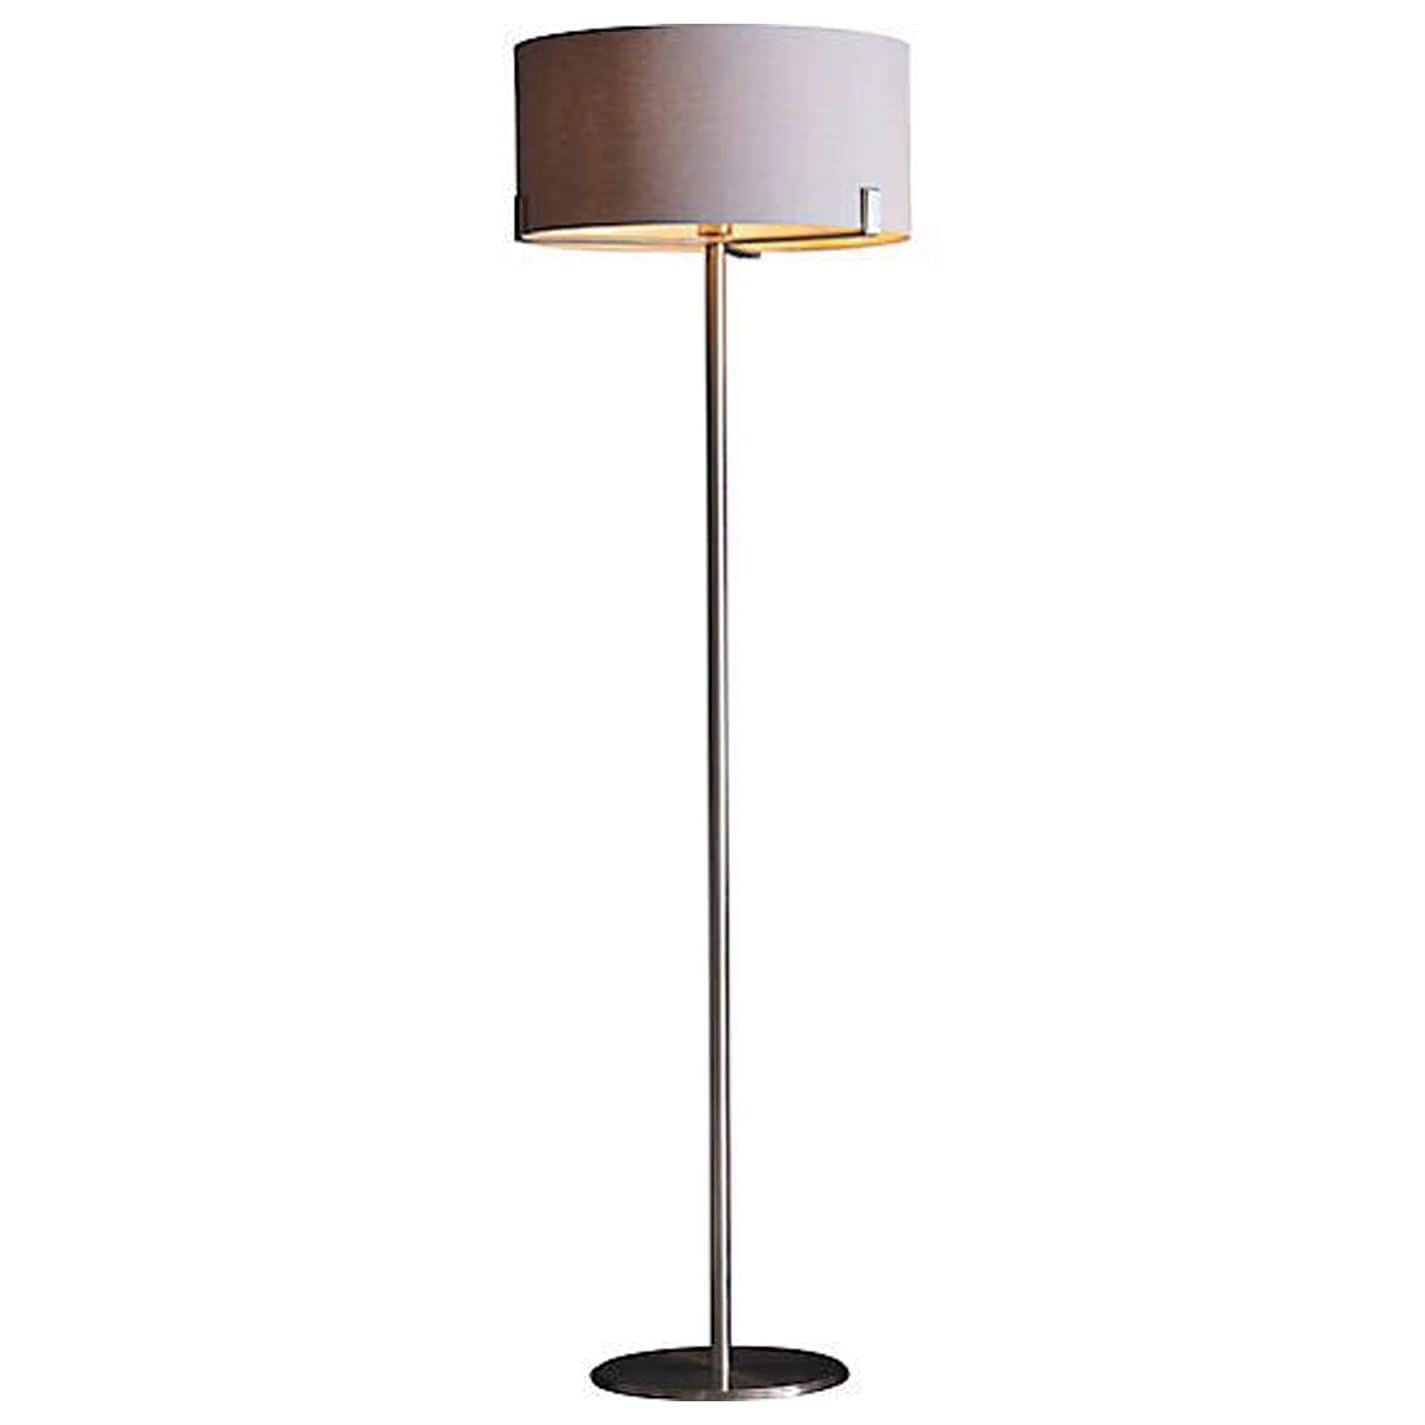 Gallery Direct Gallery Floor Lamp Ev 00 House Of Fraser for dimensions 1425 X 1425